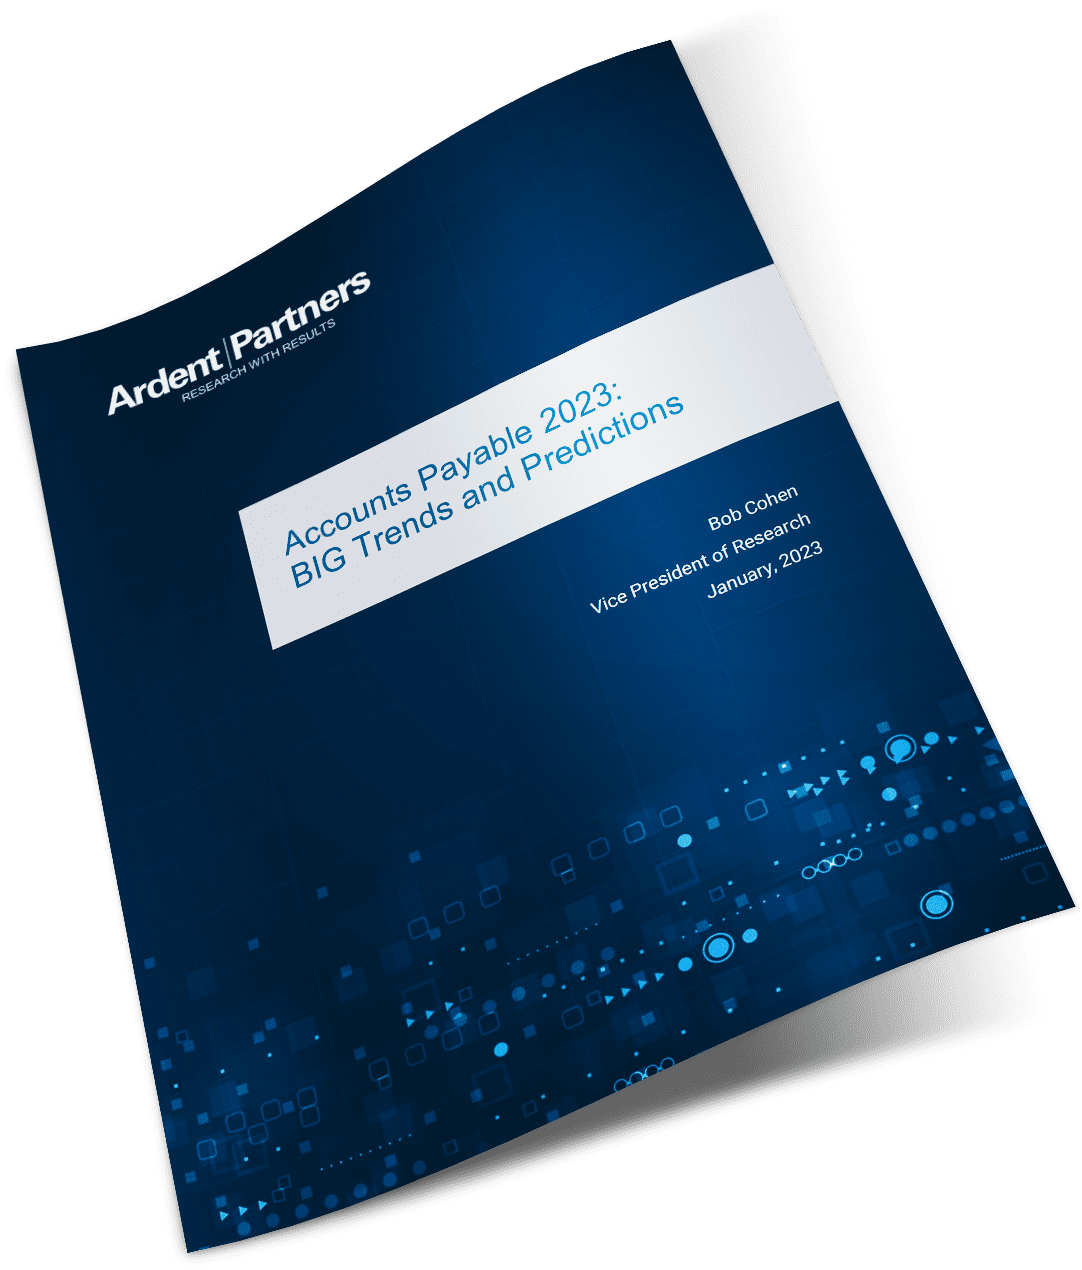 Physical copy of Ardent Partners report on 2023 Accounts Payable trends and predictions